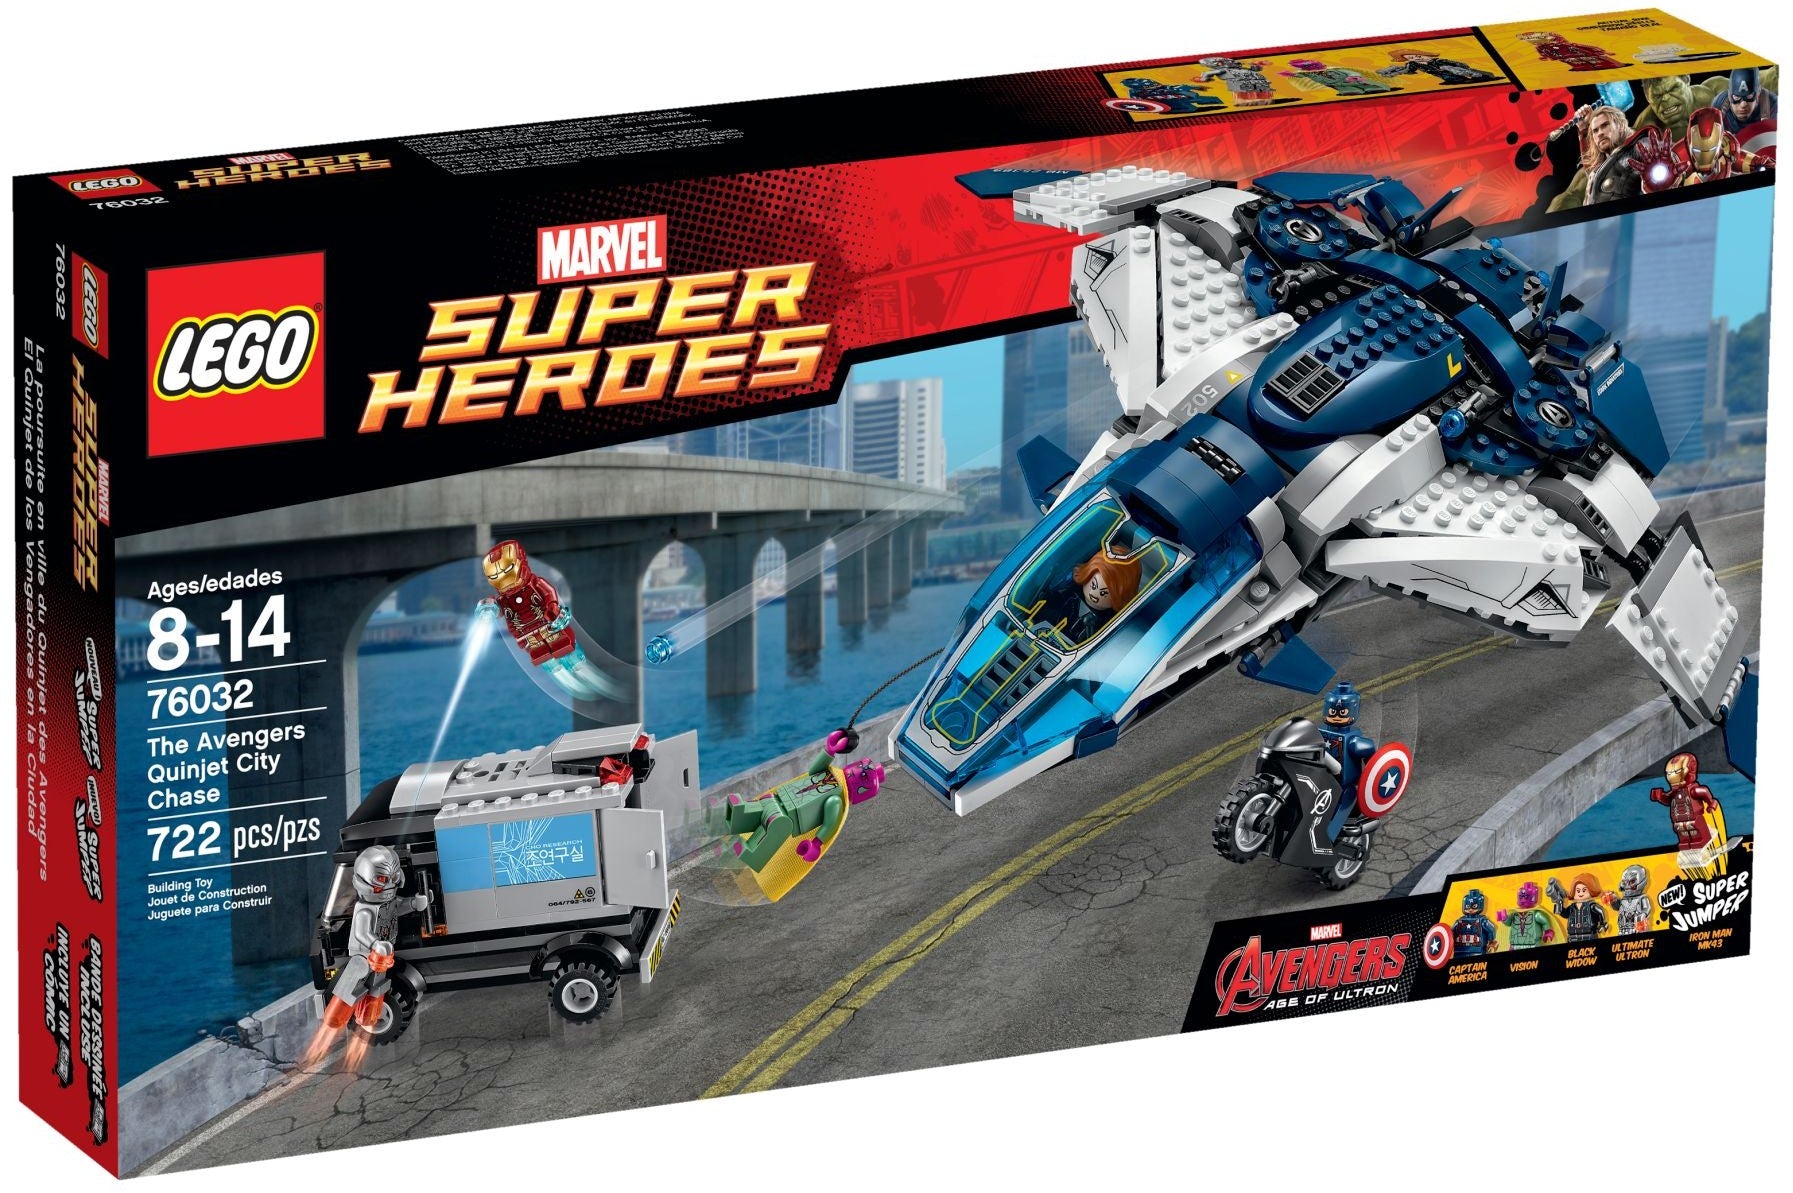 Lego Super Heroes 76032 - Avengers Quinjet City Chase